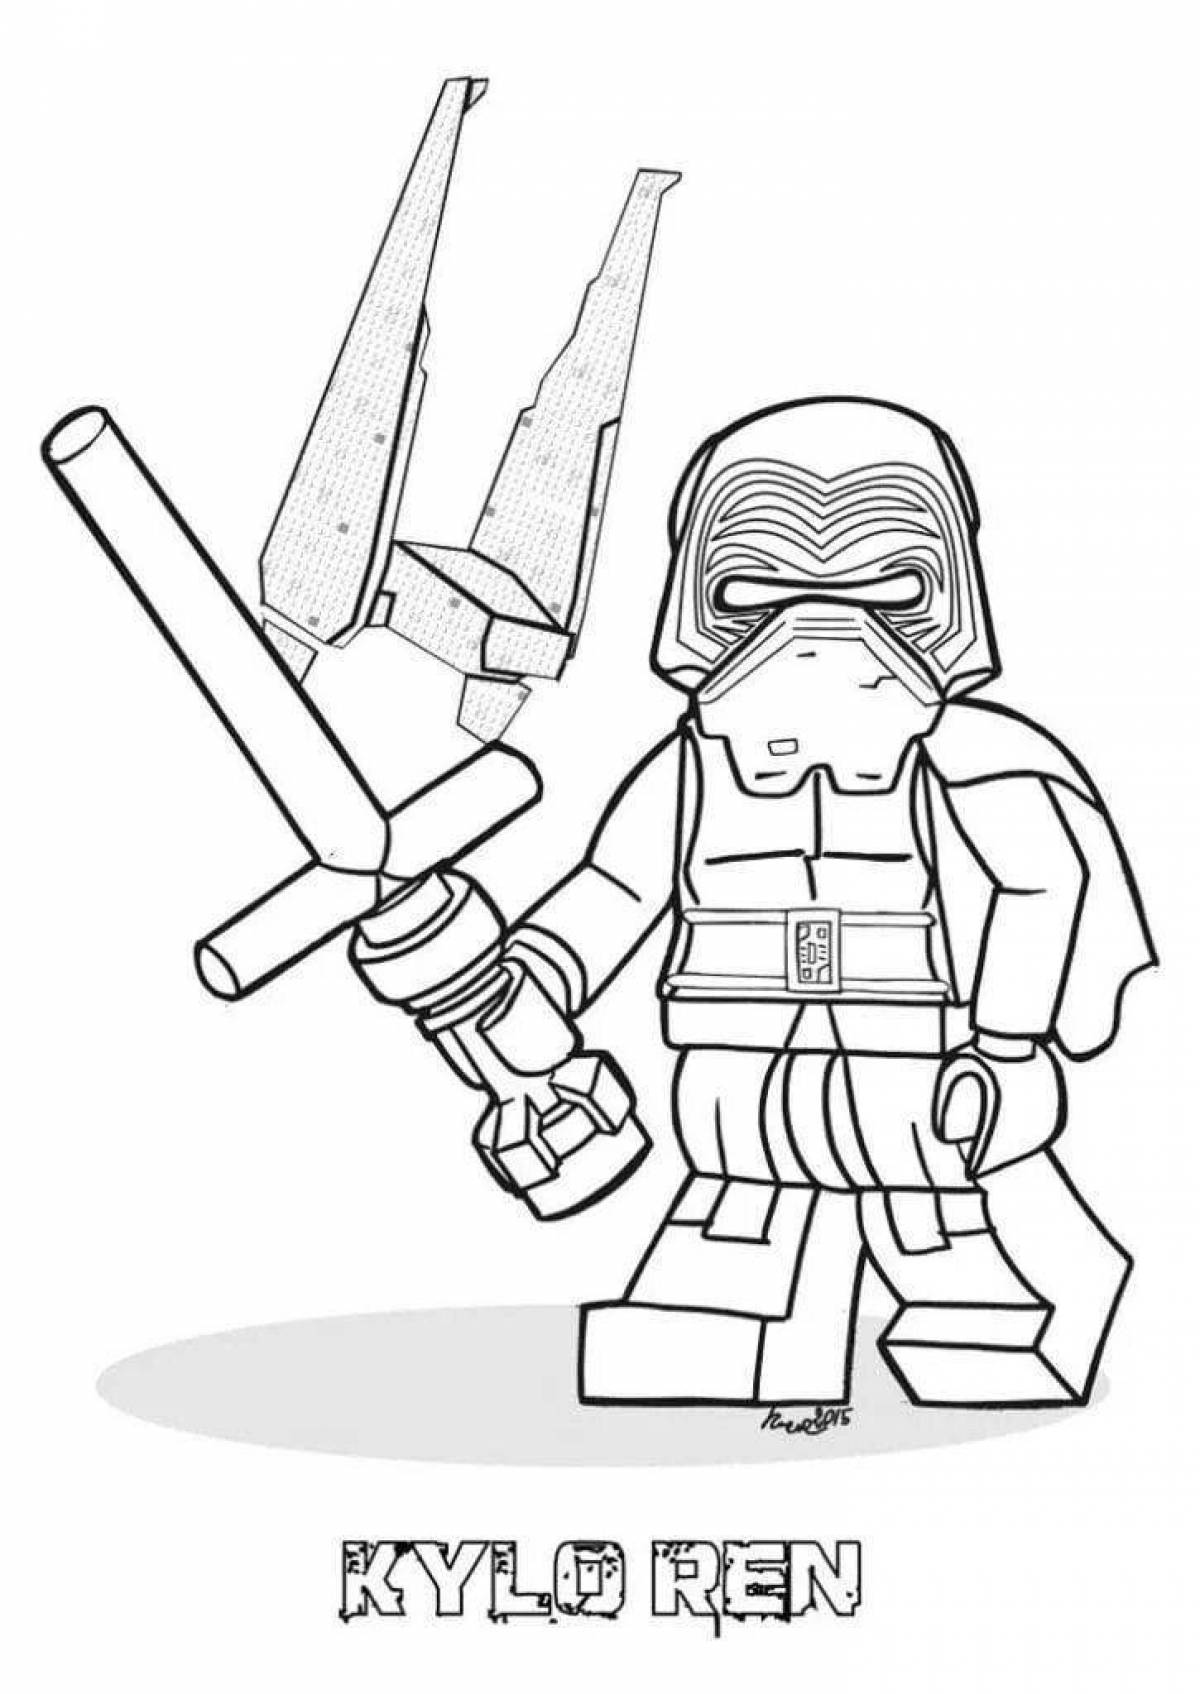 Lego star wars dazzling coloring book